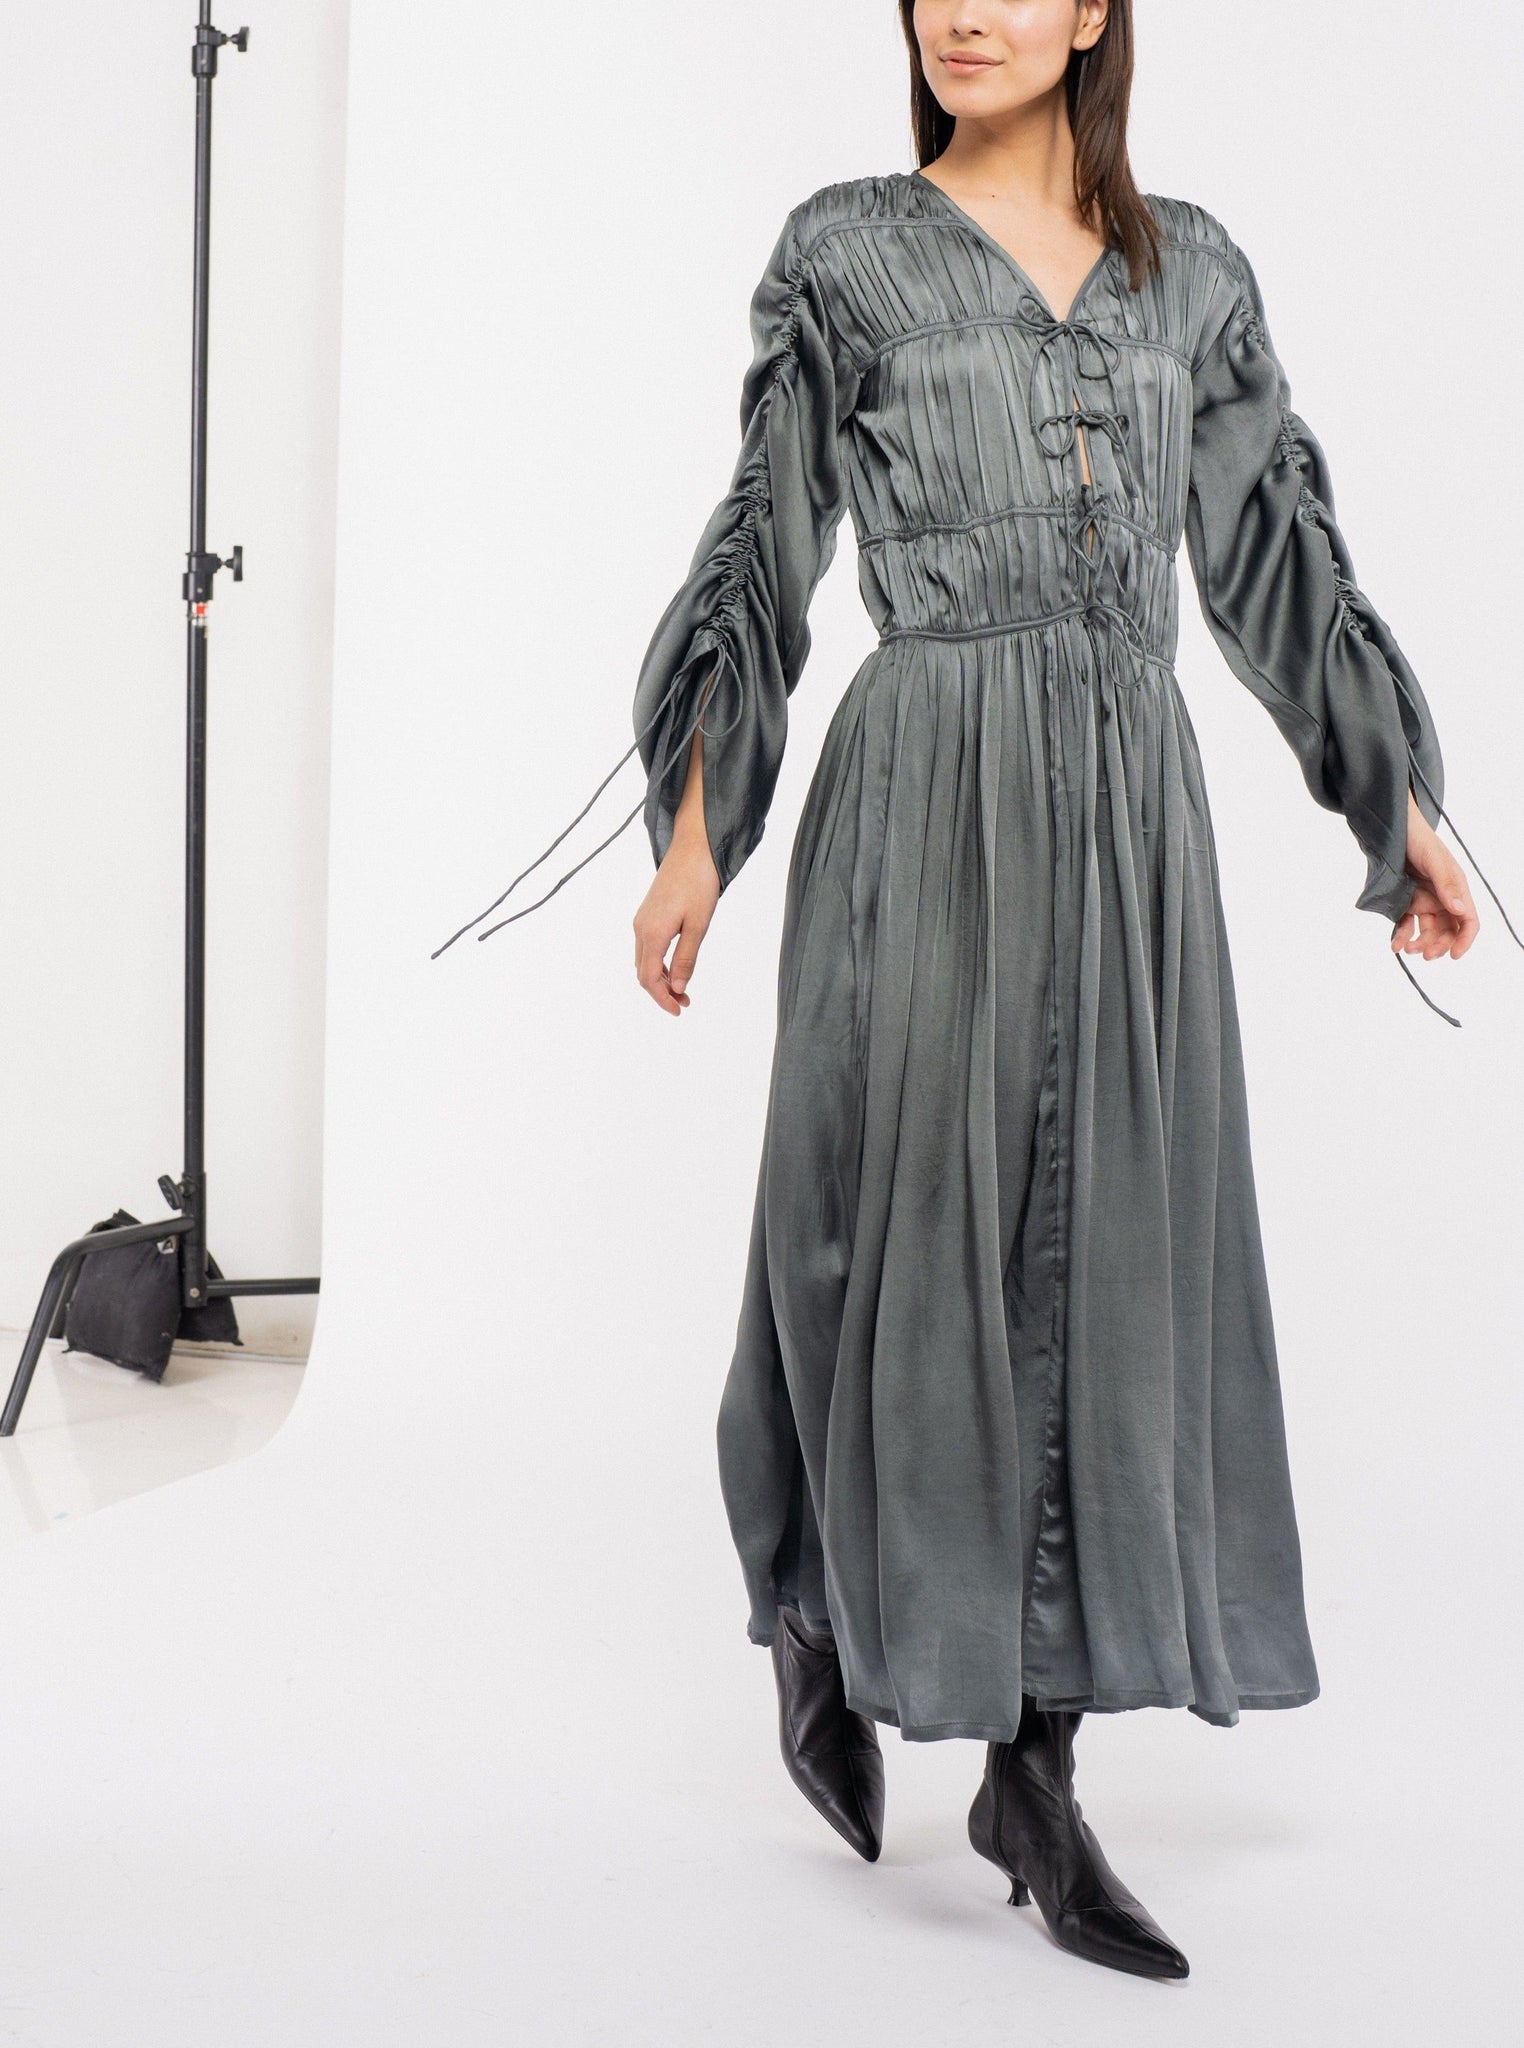 The model is wearing an Iris Dress - Slate with adjustable sleeves.